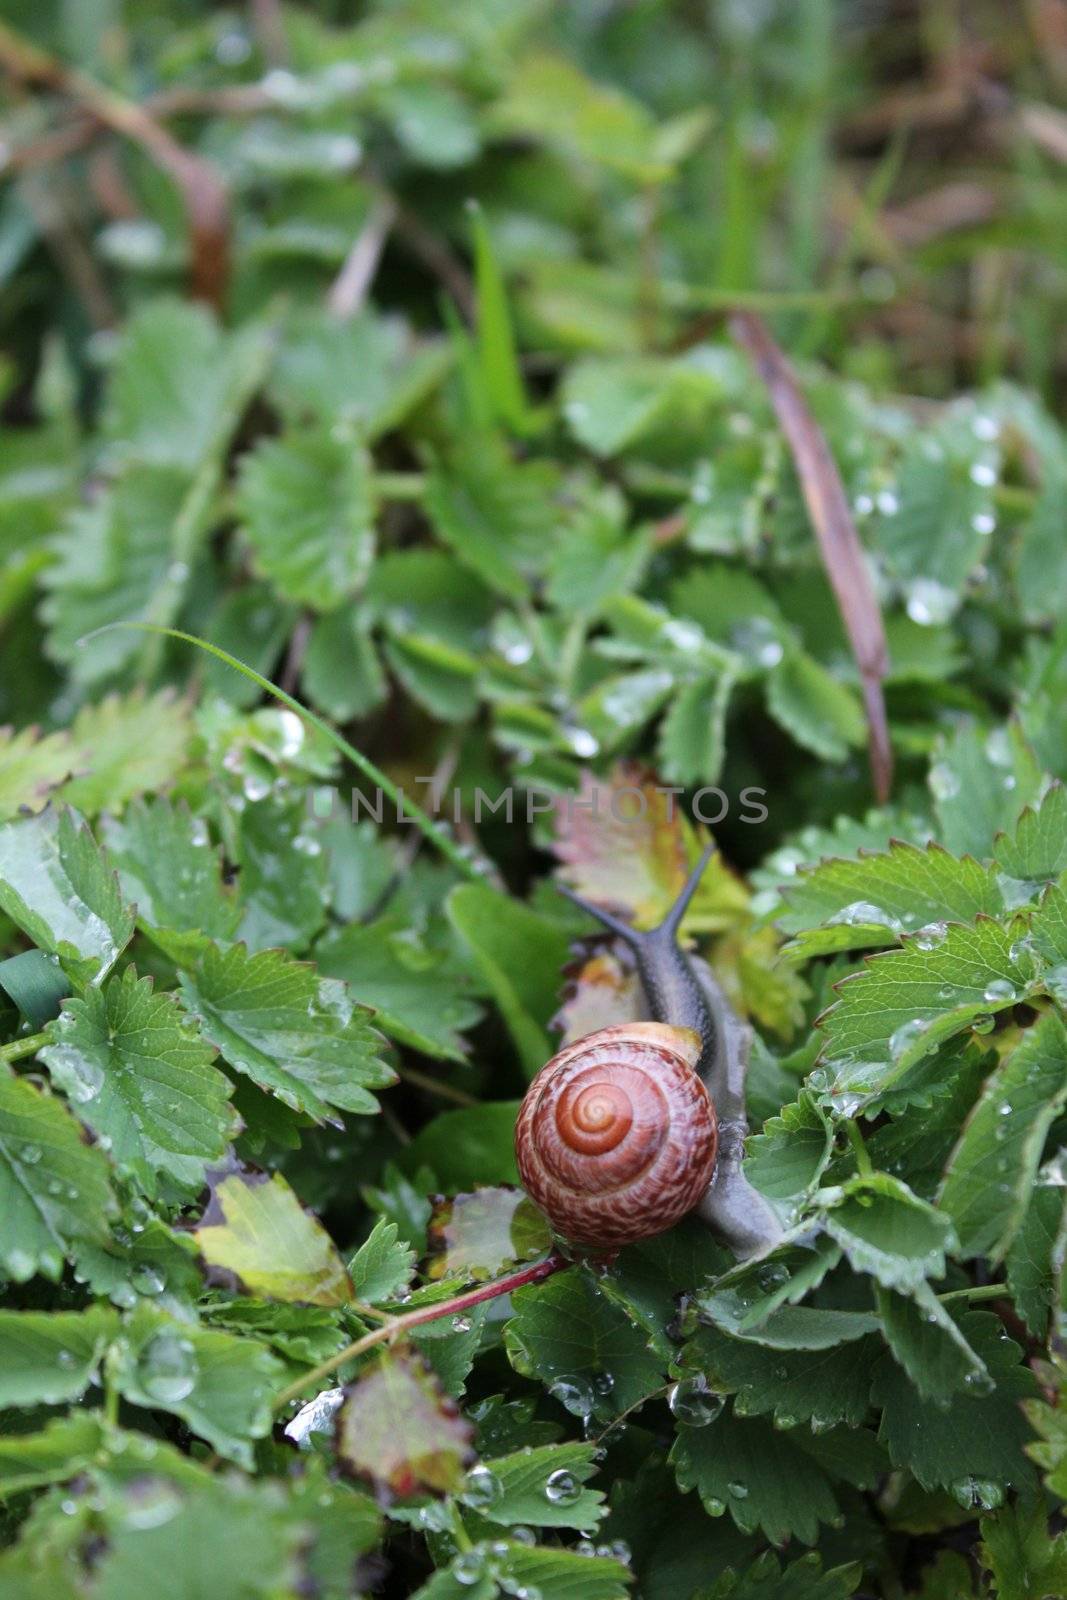 snail and plants green